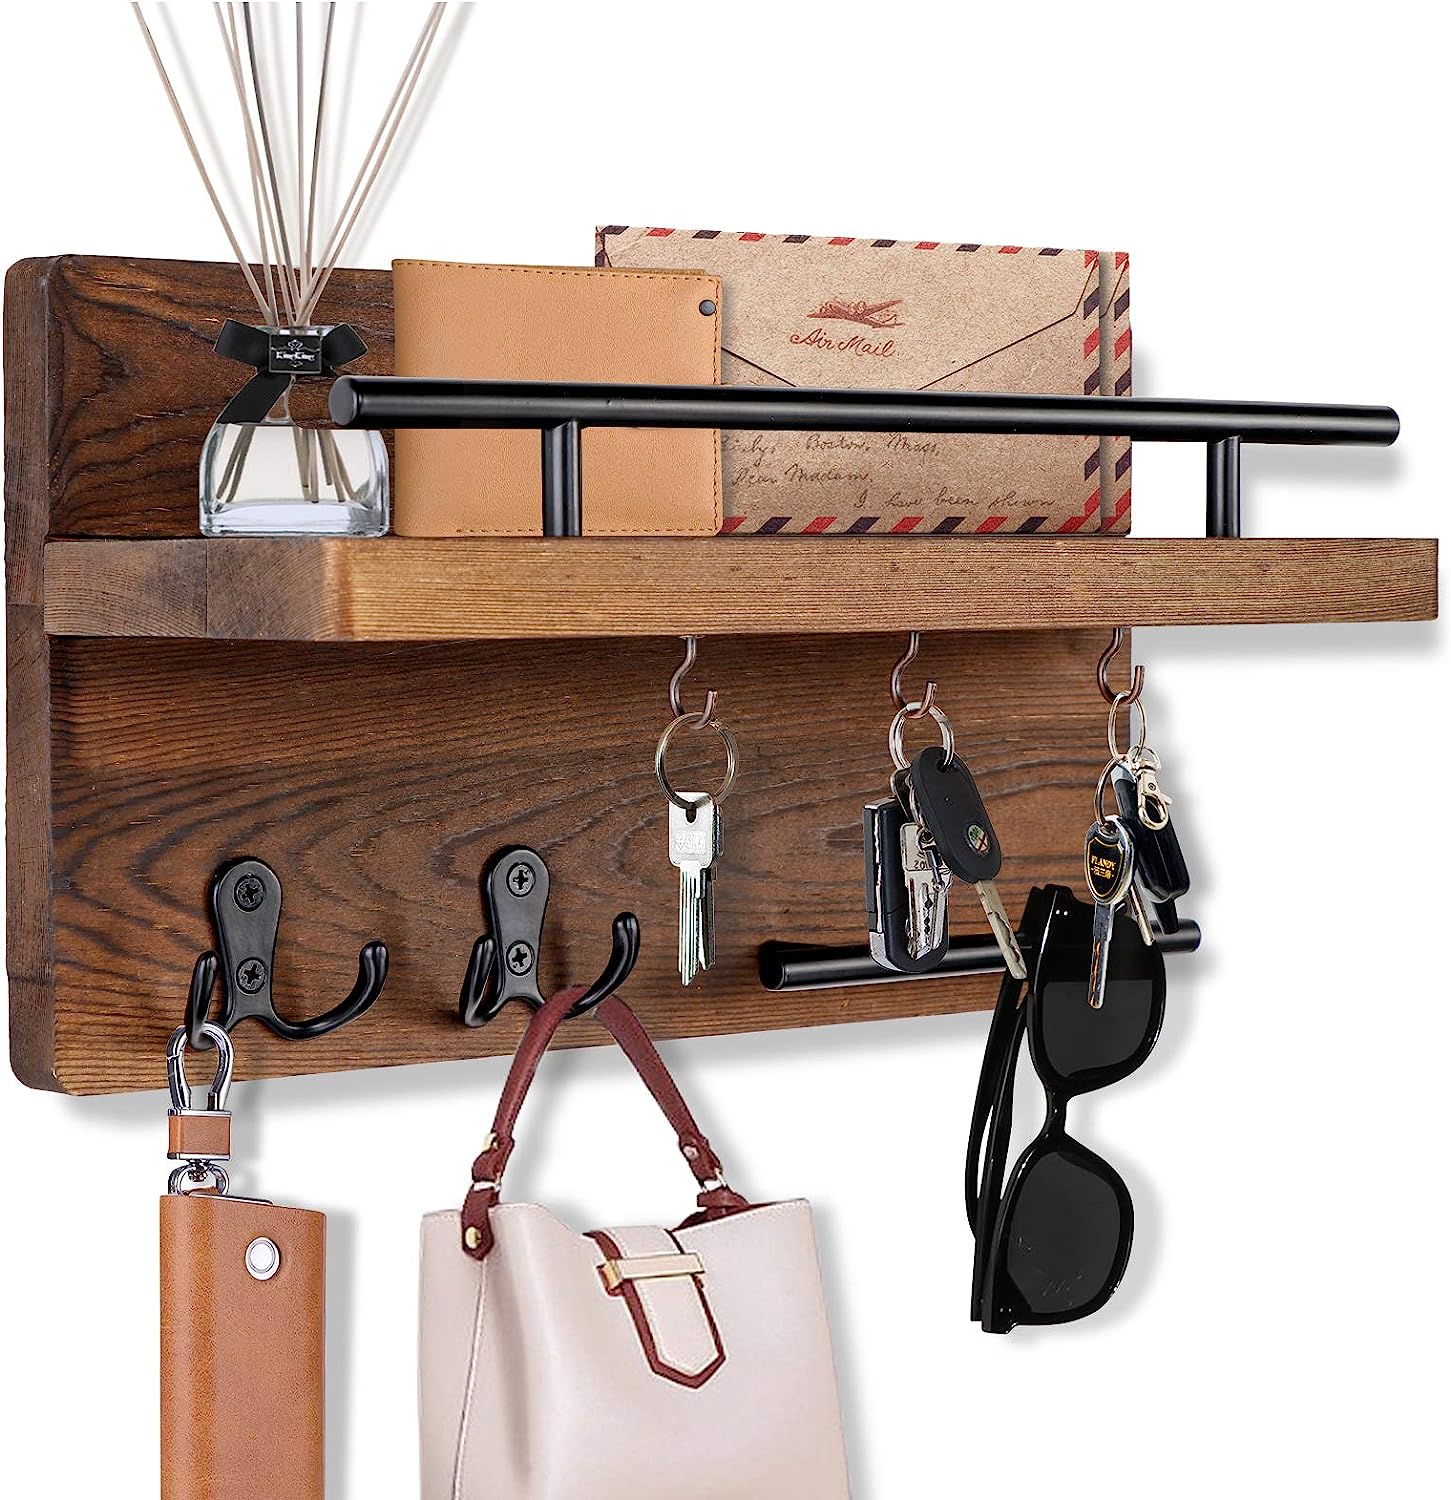 Hangers for Wall Decorative with 5 Key Hooks, Wooden Mail Rack Organizer with Shelf